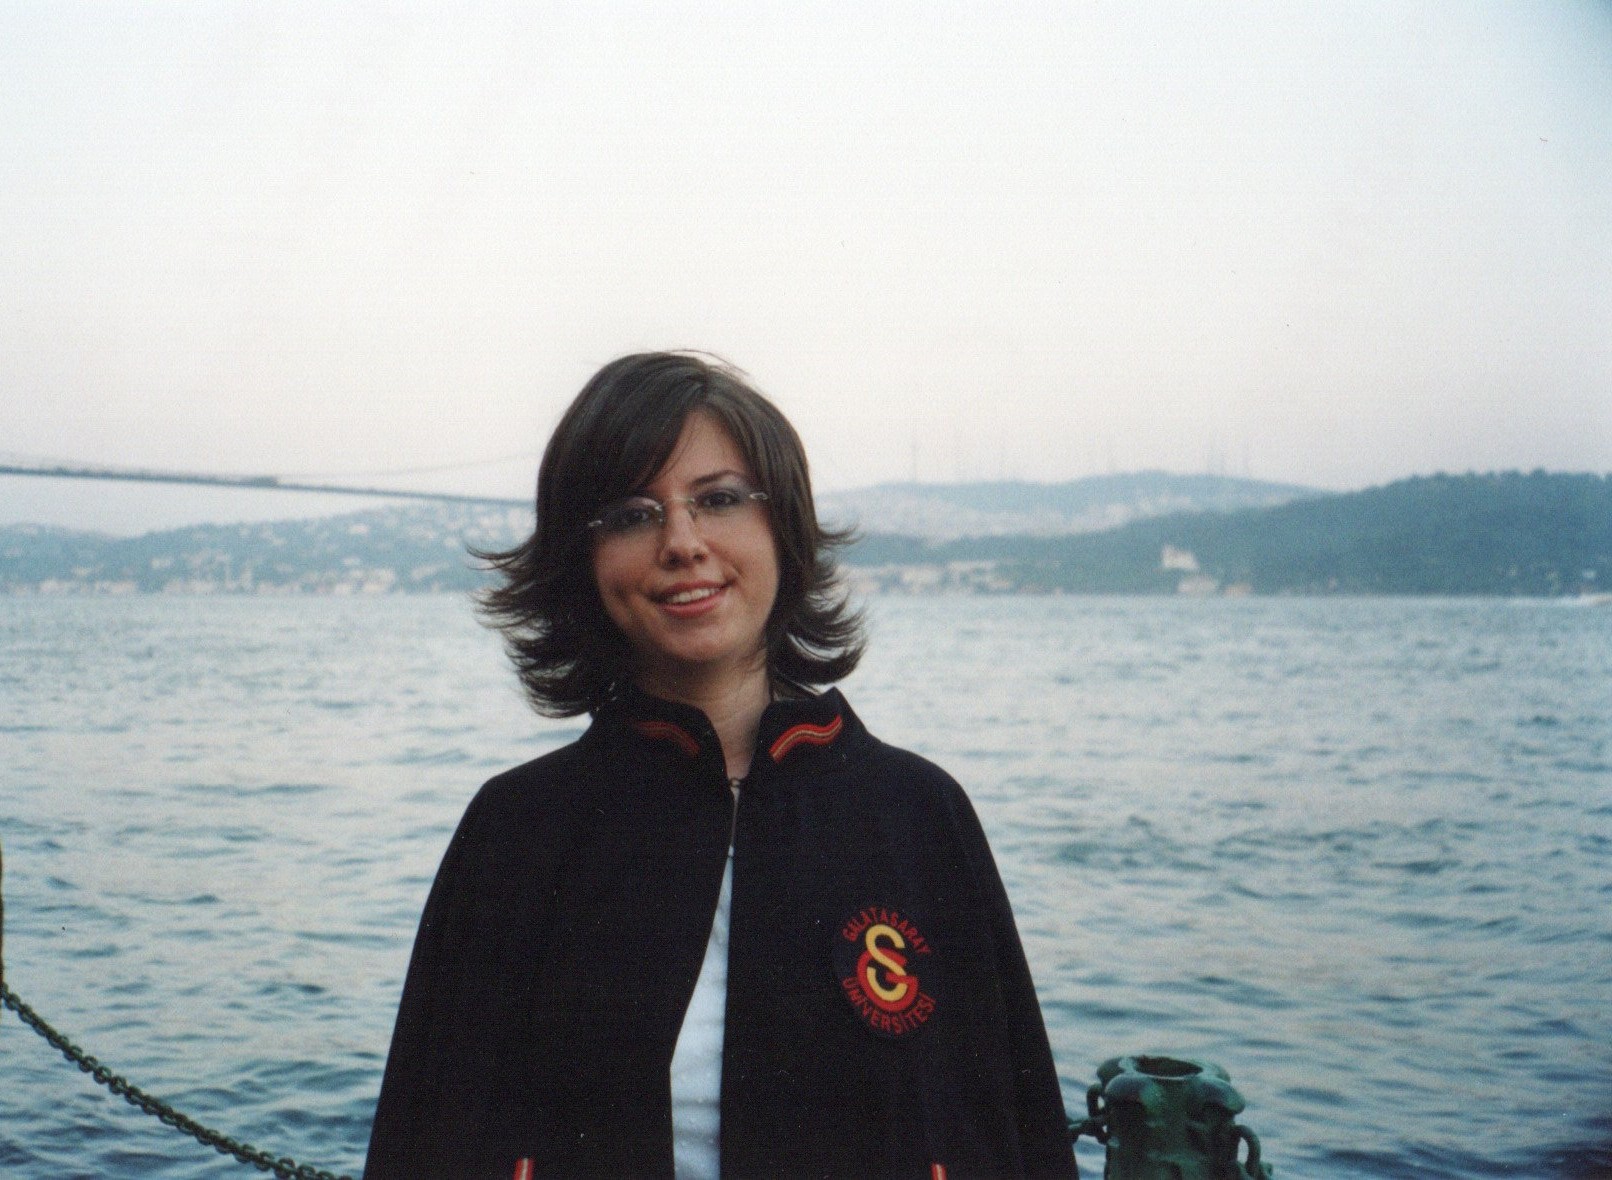 Ceyda Tunarli standing in front of a lake